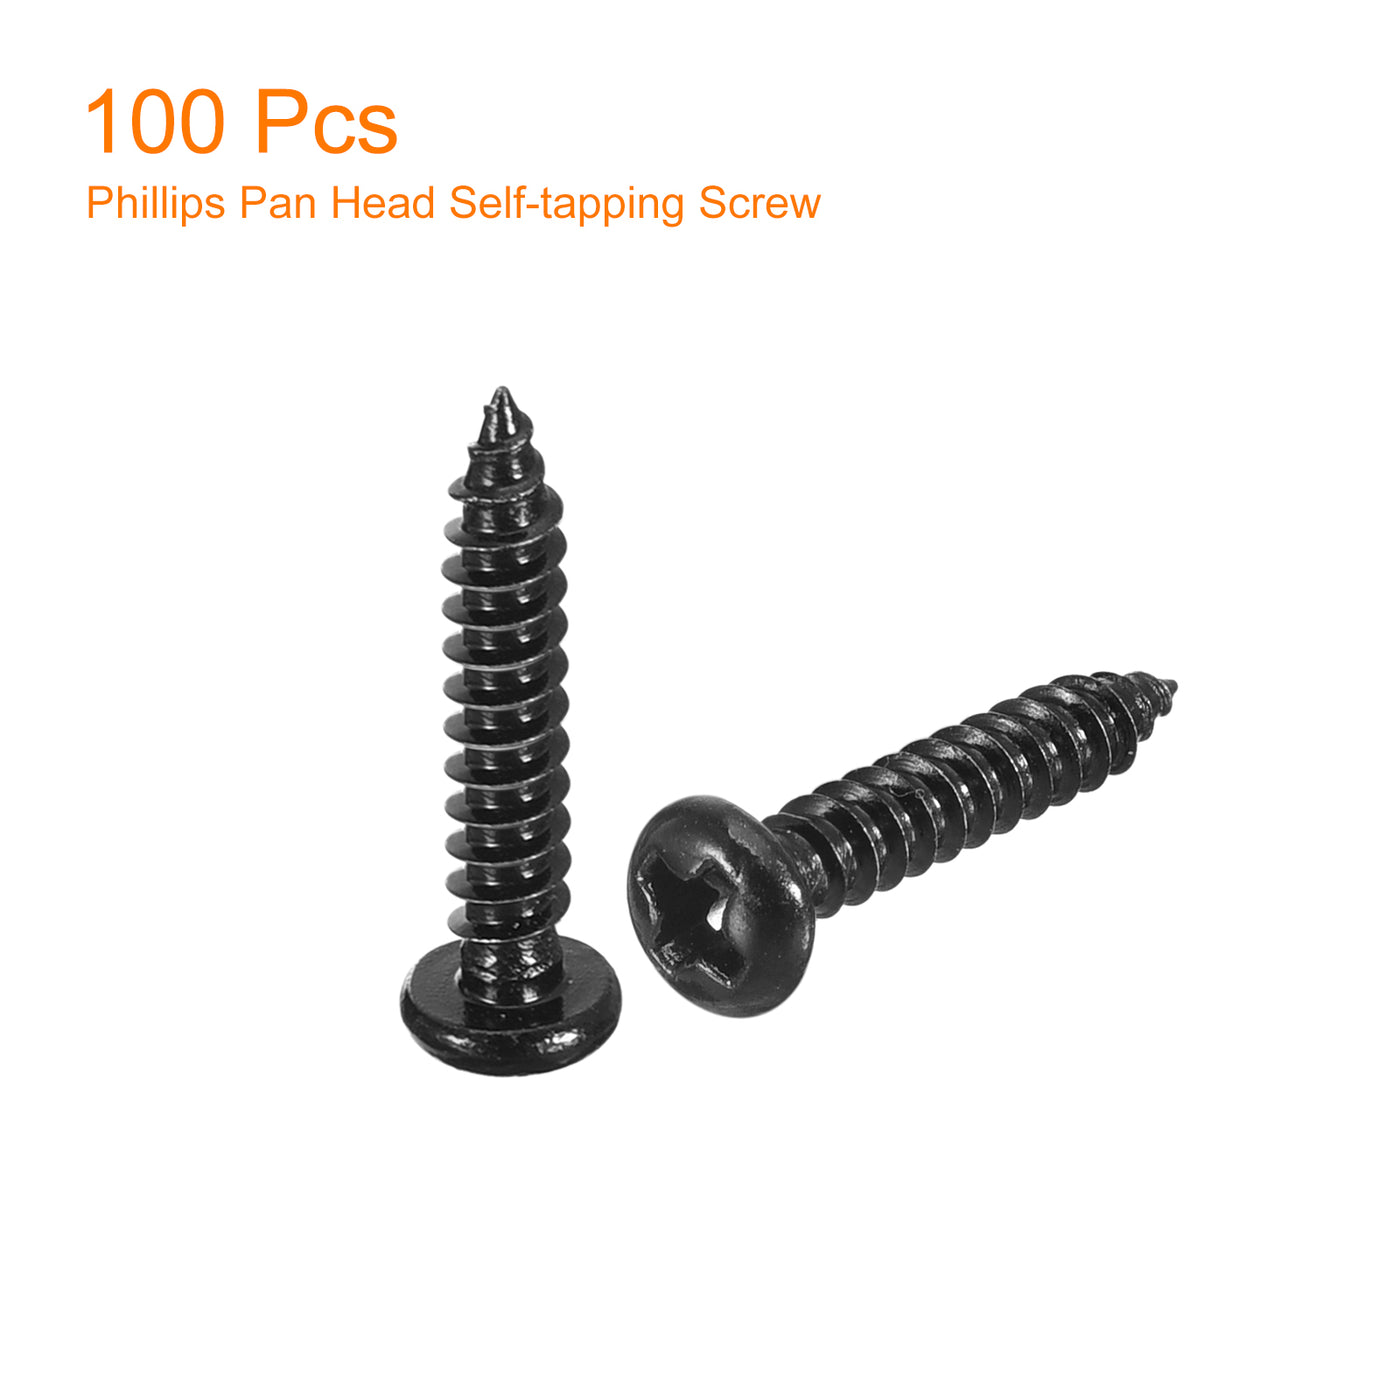 uxcell Uxcell 3mm x 16mm Phillips Pan Head Self-tapping Screw, 100pcs - 304 Stainless Steel Round Head Wood Screw Full Thread (Black)